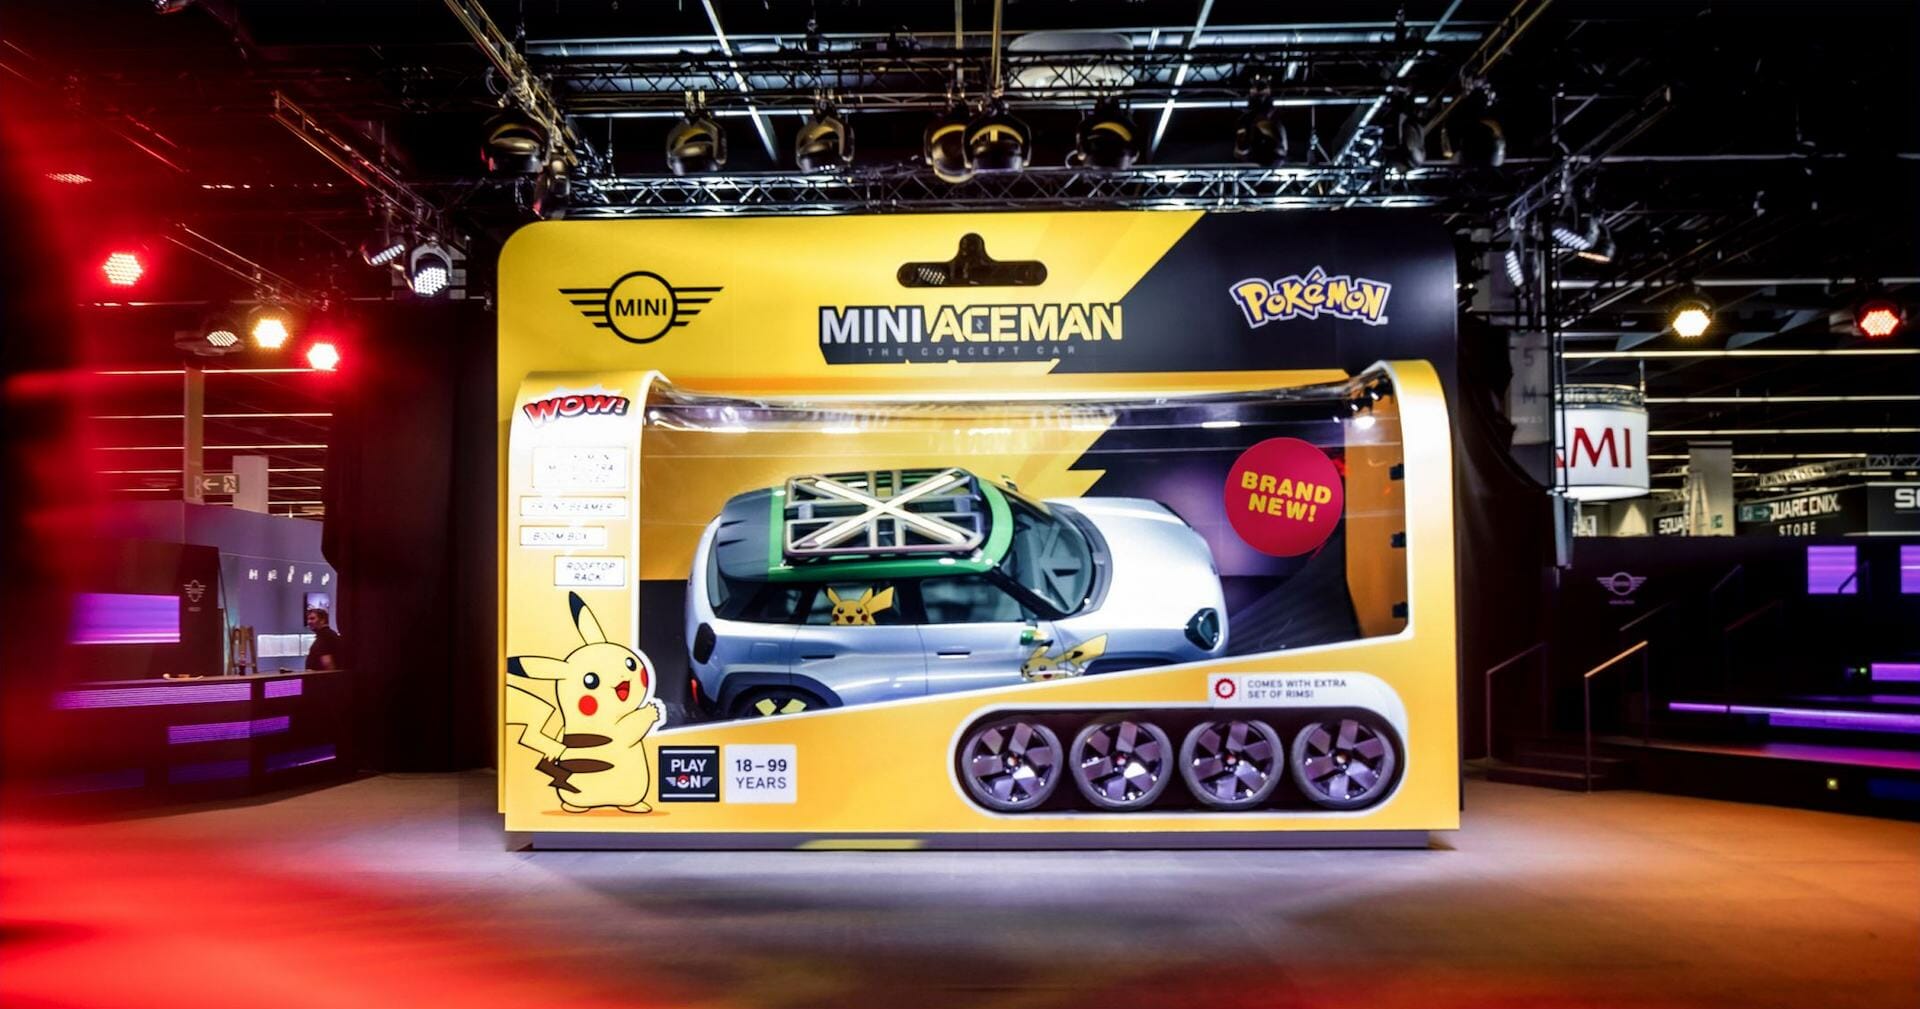 MINI and Pokemon showed a concept car with a built-in projector to which you can connect a game console